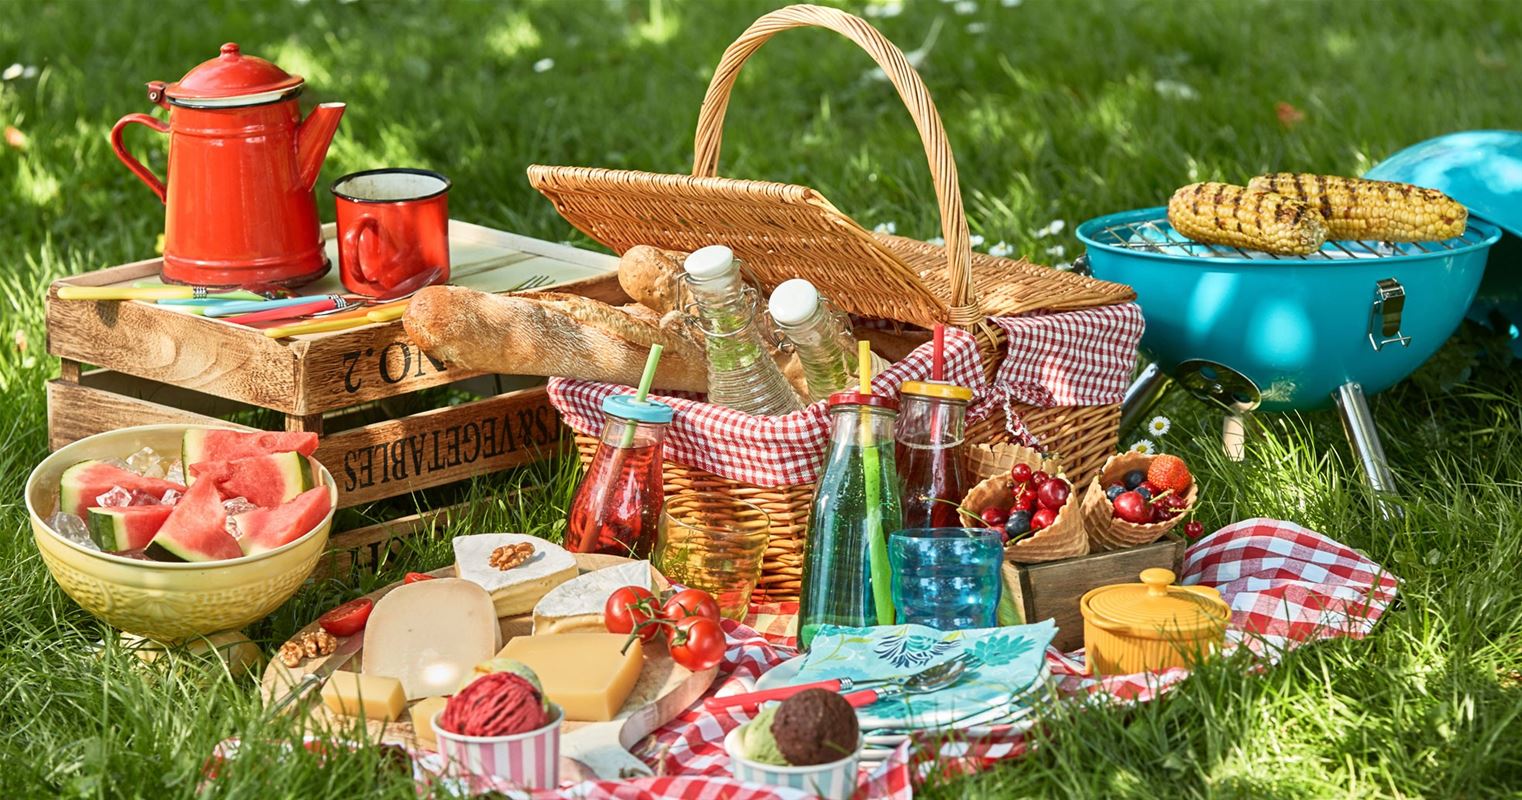 Picnic laid out in the green.